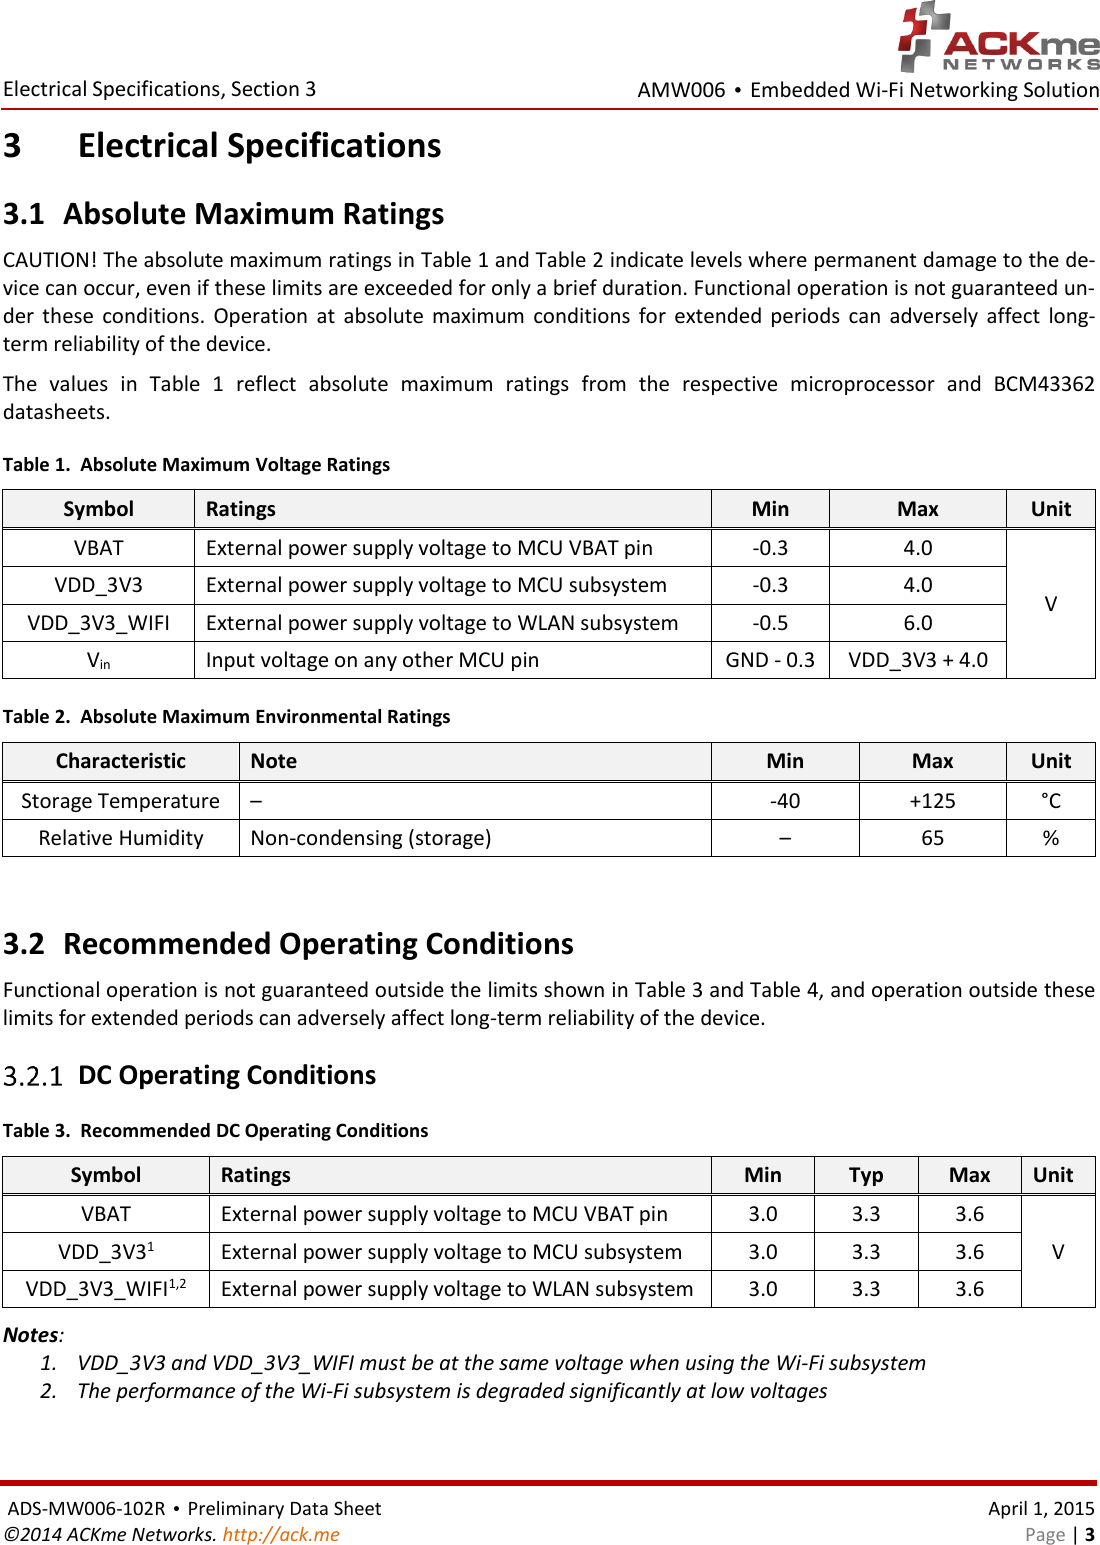 AMW006 • Embedded Wi-Fi Networking Solution  Electrical Specifications, Section 3  ADS-MW006-102R • Preliminary Data Sheet    April 1, 2015 ©2014 ACKme Networks. http://ack.me    Page | 3 3 Electrical Specifications 3.1 Absolute Maximum Ratings CAUTION! The absolute maximum ratings in Table 1 and Table 2 indicate levels where permanent damage to the de-vice can occur, even if these limits are exceeded for only a brief duration. Functional operation is not guaranteed un-der  these  conditions.  Operation  at  absolute  maximum  conditions  for  extended  periods  can  adversely  affect  long-term reliability of the device. The  values  in  Table  1  reflect  absolute  maximum  ratings  from  the  respective  microprocessor  and  BCM43362 datasheets. Table 1.  Absolute Maximum Voltage Ratings Symbol Ratings Min Max Unit VBAT External power supply voltage to MCU VBAT pin -0.3 4.0 V VDD_3V3 External power supply voltage to MCU subsystem -0.3 4.0 VDD_3V3_WIFI External power supply voltage to WLAN subsystem -0.5 6.0 Vin Input voltage on any other MCU pin GND - 0.3 VDD_3V3 + 4.0 Table 2.  Absolute Maximum Environmental Ratings Characteristic Note Min Max Unit Storage Temperature –  -40 +125 °C Relative Humidity Non-condensing (storage) – 65 %  3.2 Recommended Operating Conditions Functional operation is not guaranteed outside the limits shown in Table 3 and Table 4, and operation outside these limits for extended periods can adversely affect long-term reliability of the device.  DC Operating Conditions Table 3.  Recommended DC Operating Conditions Symbol Ratings Min Typ Max Unit VBAT External power supply voltage to MCU VBAT pin 3.0 3.3 3.6 V VDD_3V31 External power supply voltage to MCU subsystem 3.0 3.3 3.6 VDD_3V3_WIFI1,2 External power supply voltage to WLAN subsystem 3.0 3.3 3.6 Notes:  1. VDD_3V3 and VDD_3V3_WIFI must be at the same voltage when using the Wi-Fi subsystem 2. The performance of the Wi-Fi subsystem is degraded significantly at low voltages 